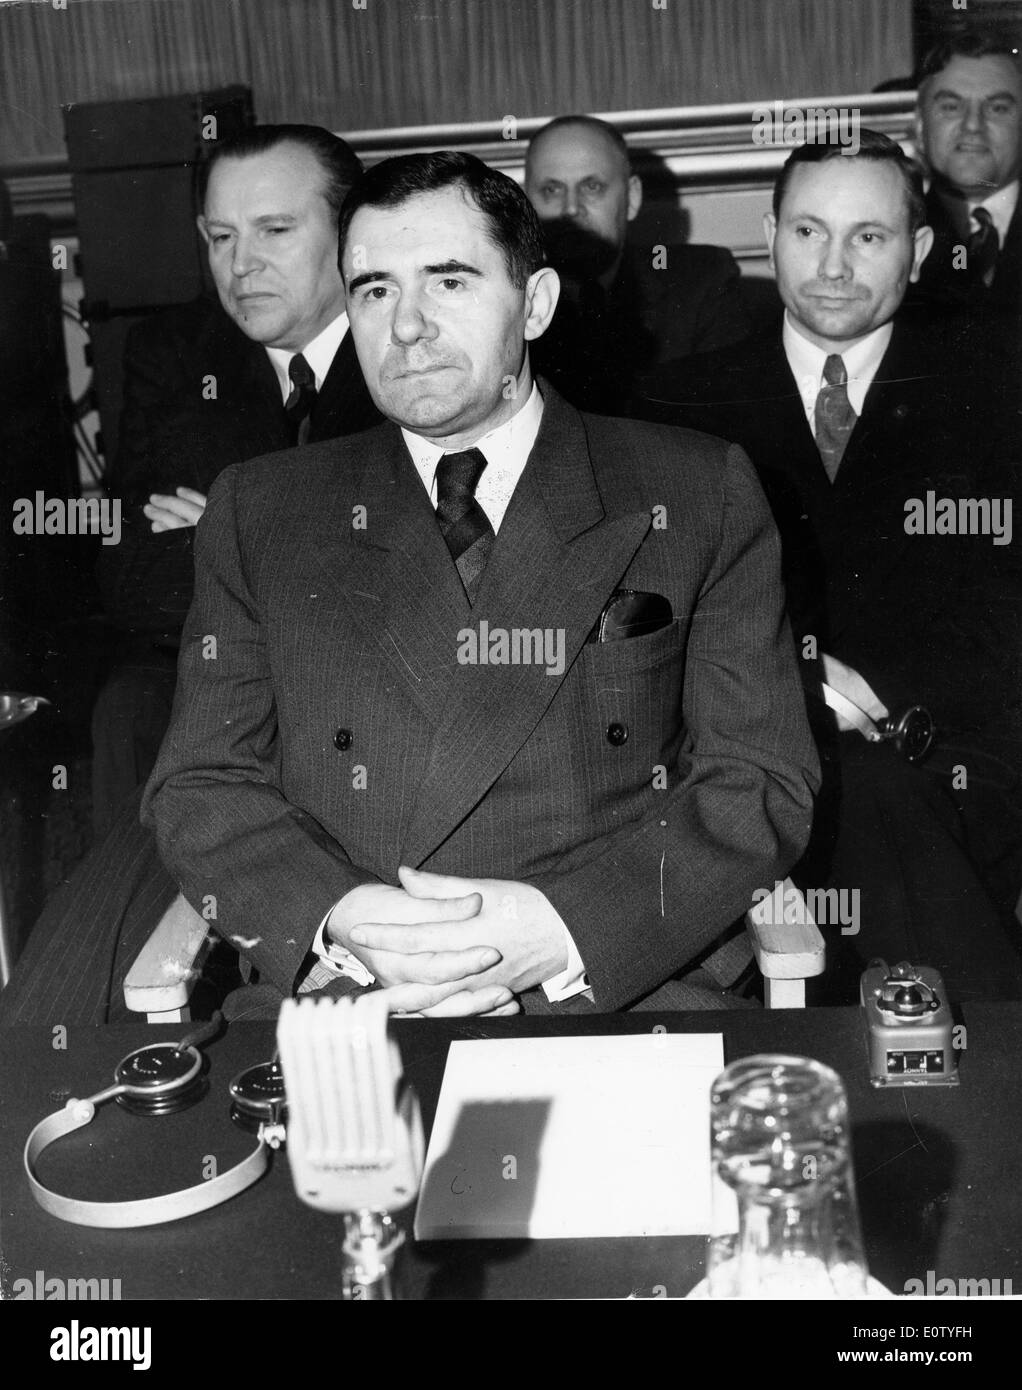 Andrei Gromyko sitting at a meeting Stock Photo